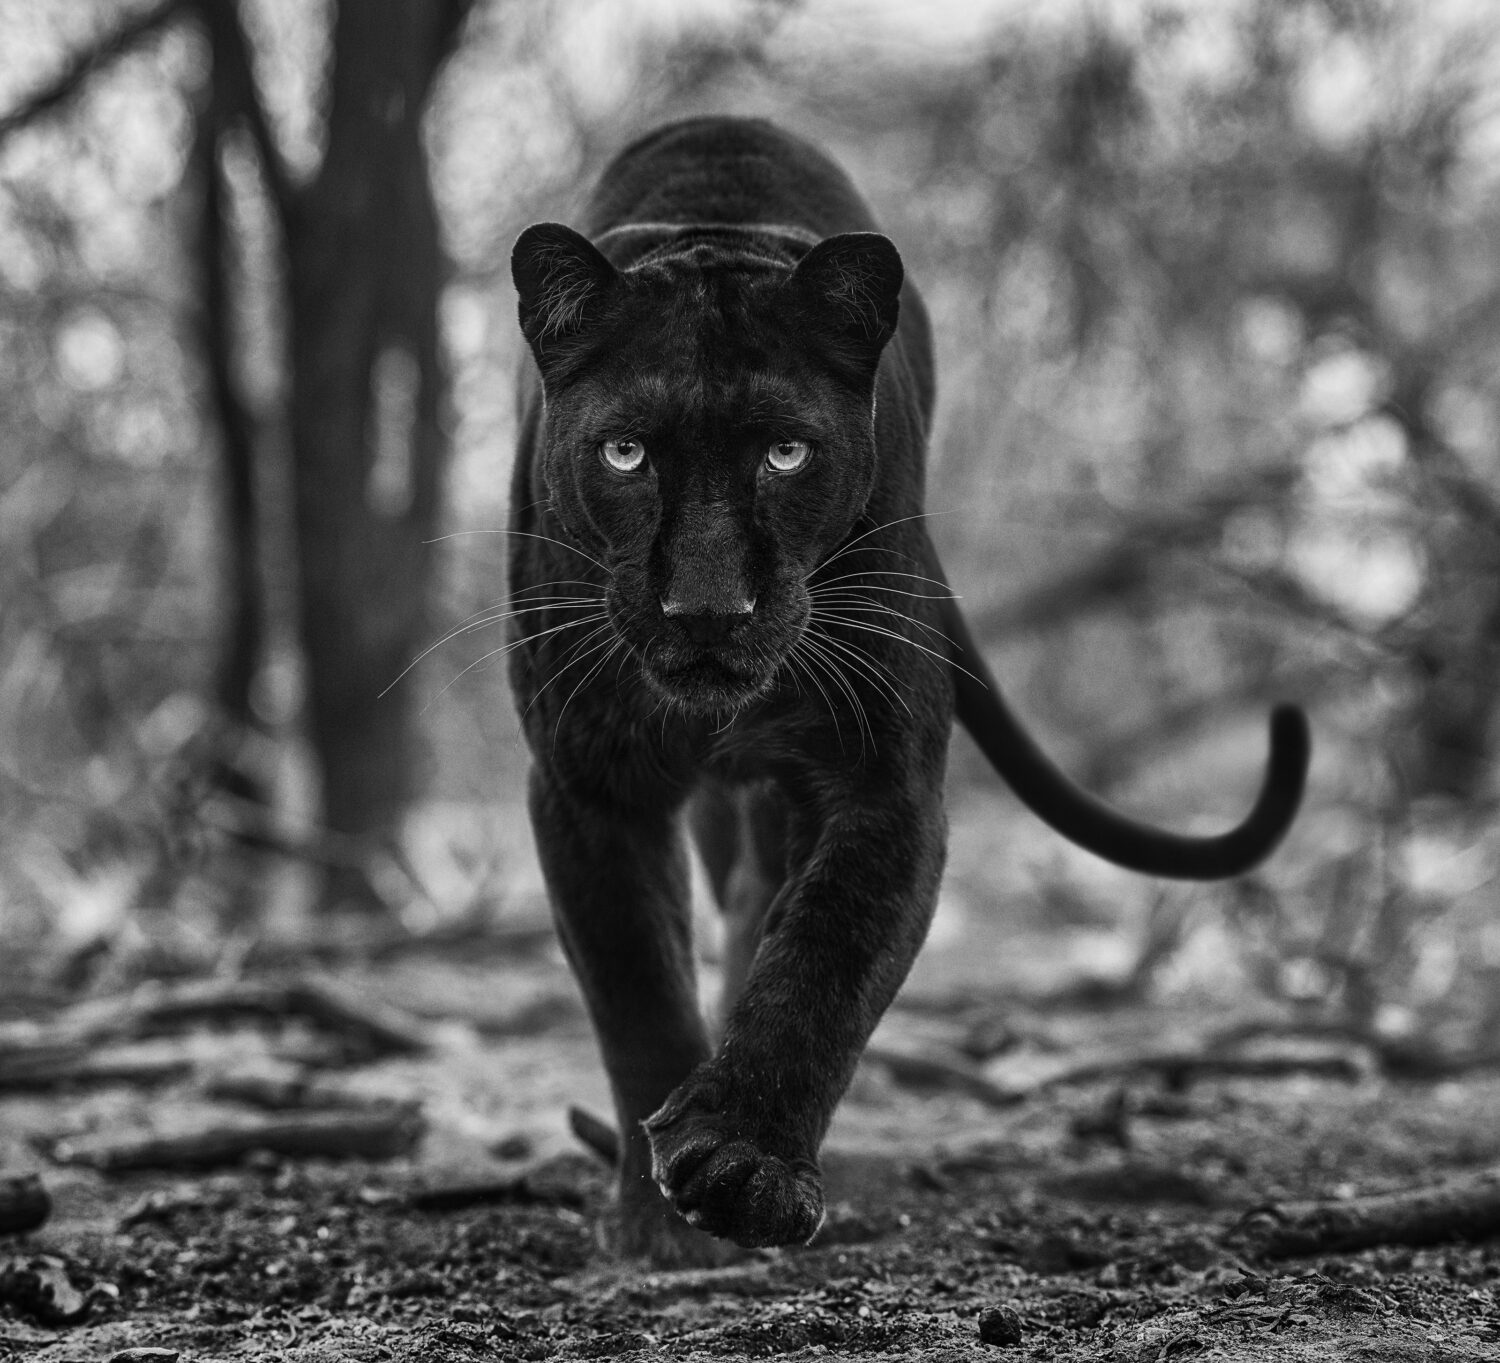 David Yarrow: Remains of the Day